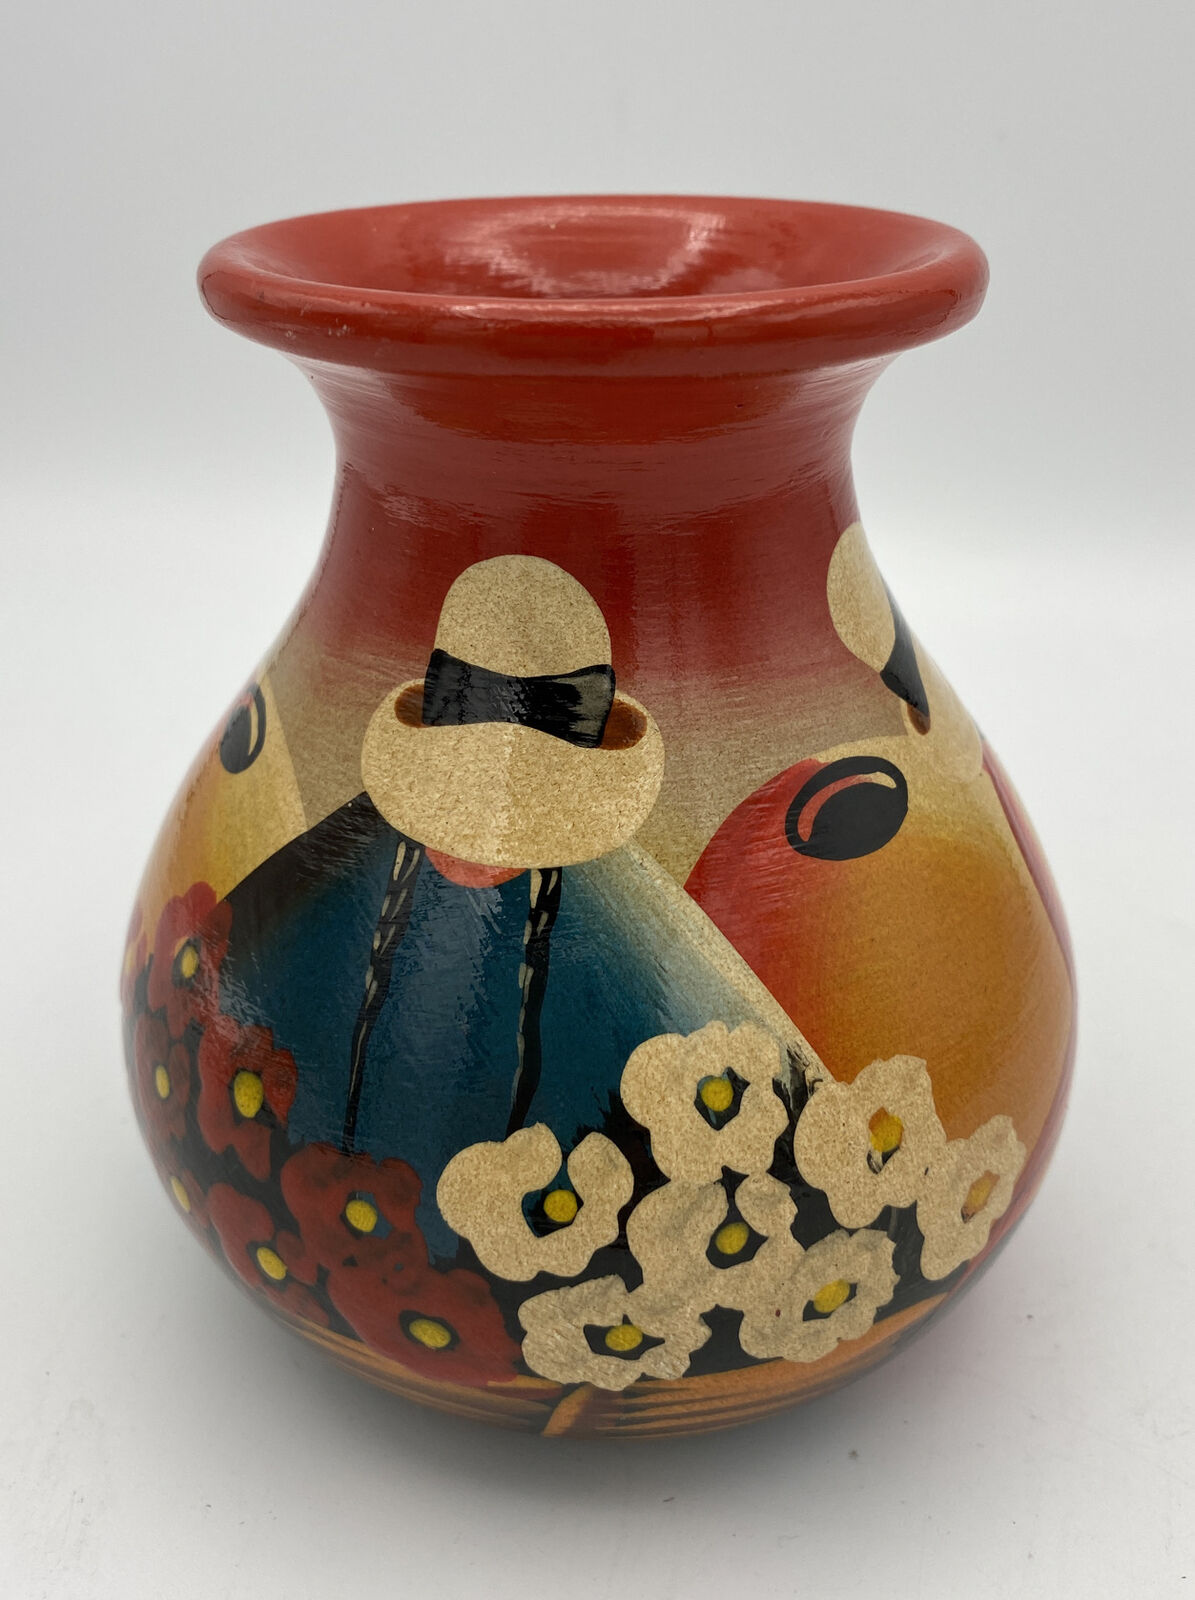 High Gloss Painted Colorful Red Black Small Vase Unmarked About 5” Tall